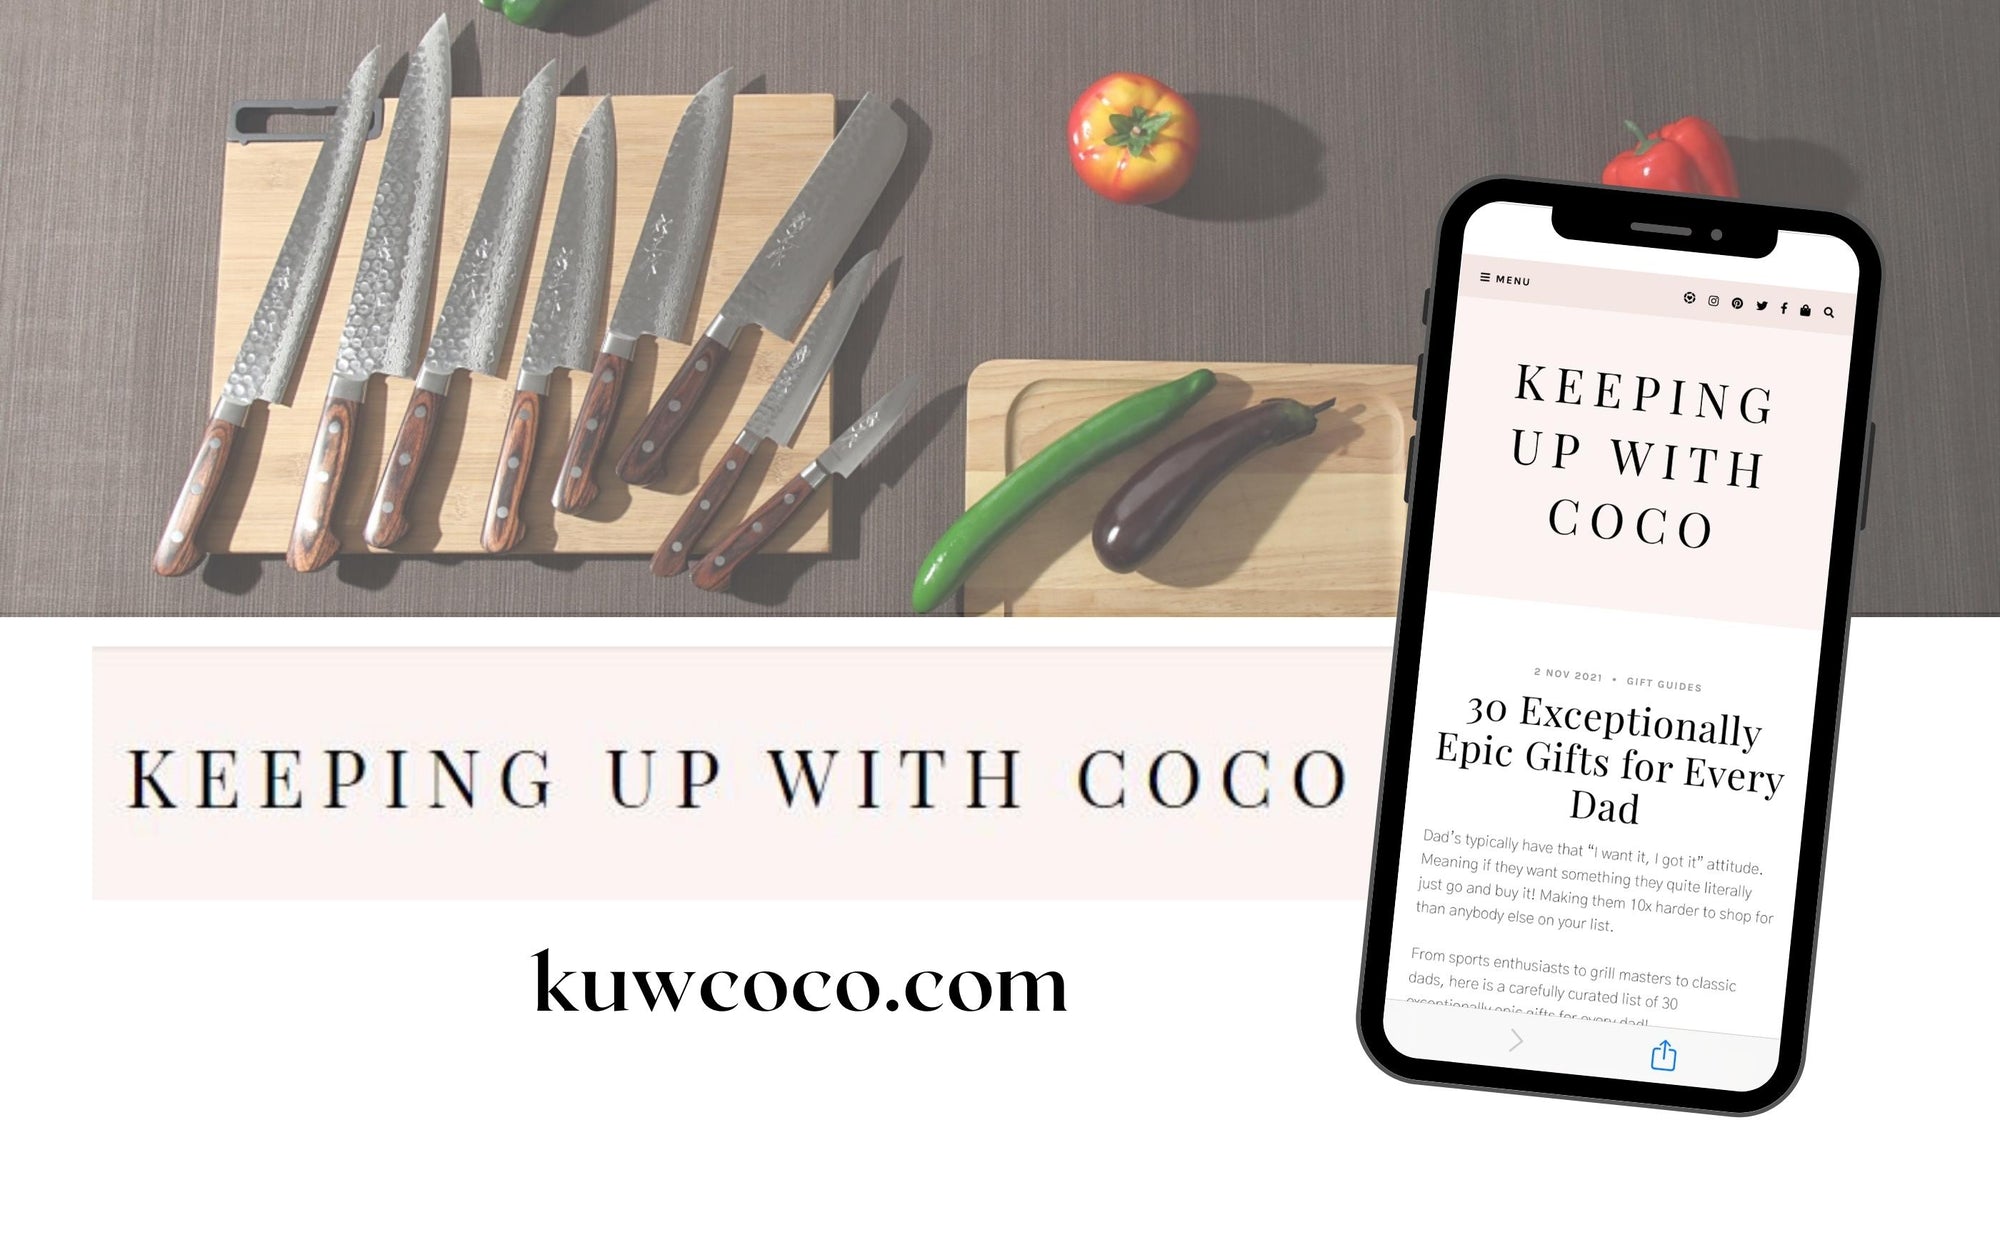 Syosaku-Japan was Featured in Keeping Up With Coco